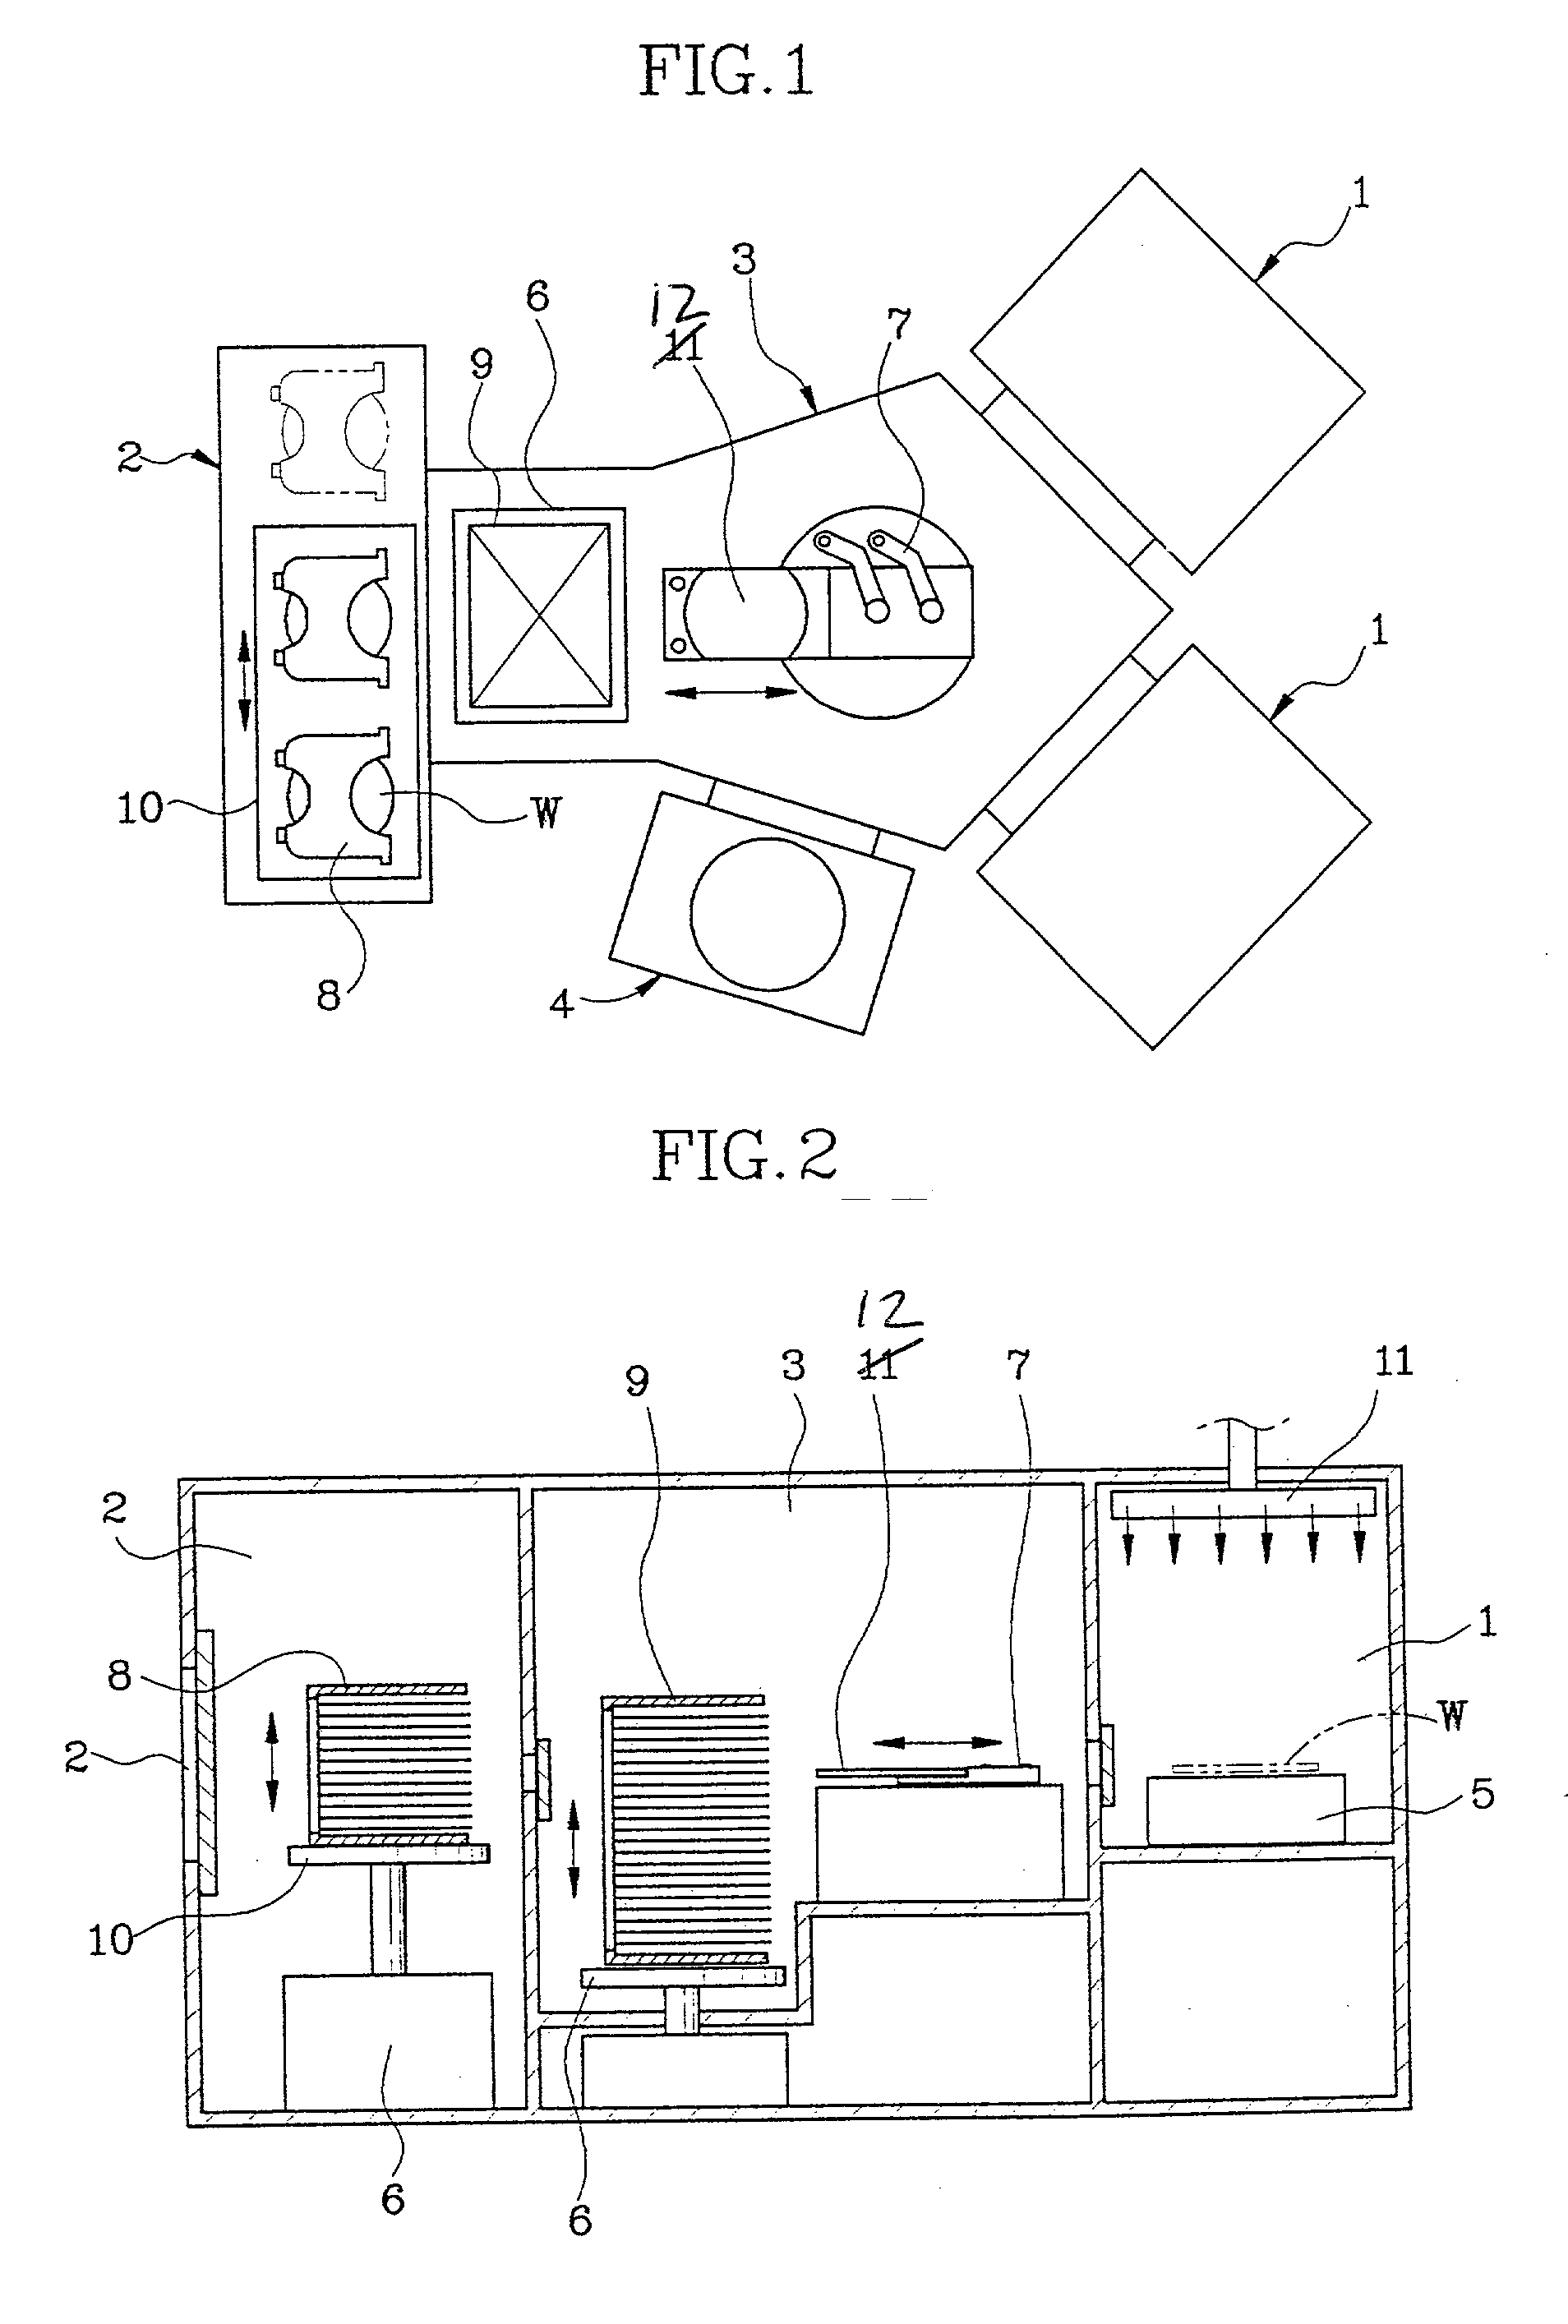 Etching apparatus for manufacturing semiconductor devices